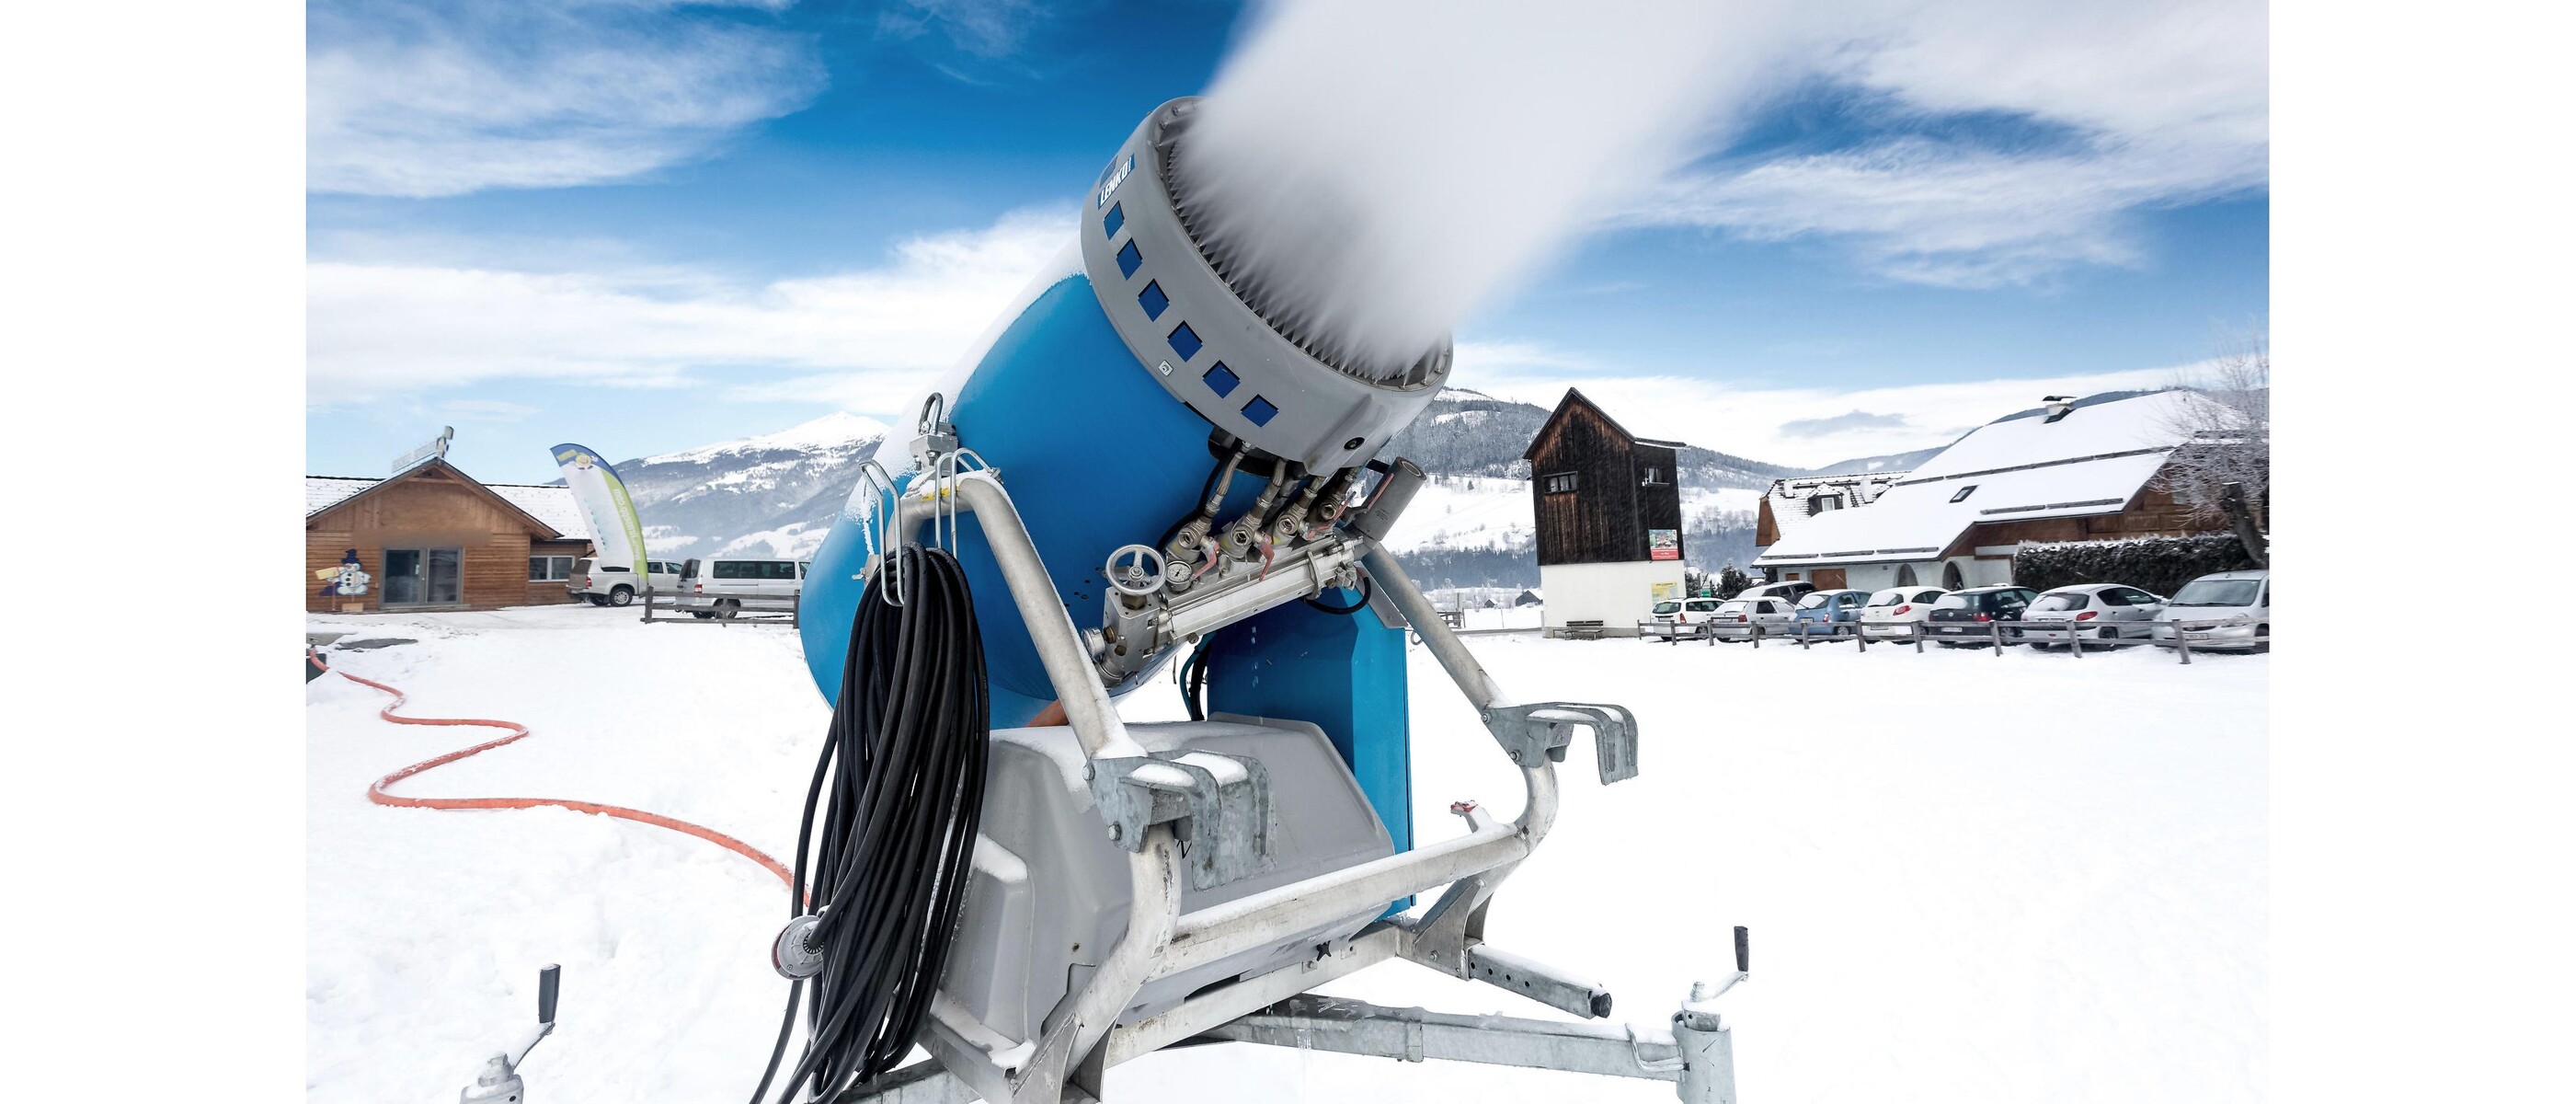 Snow-making equipment with KSB pumps